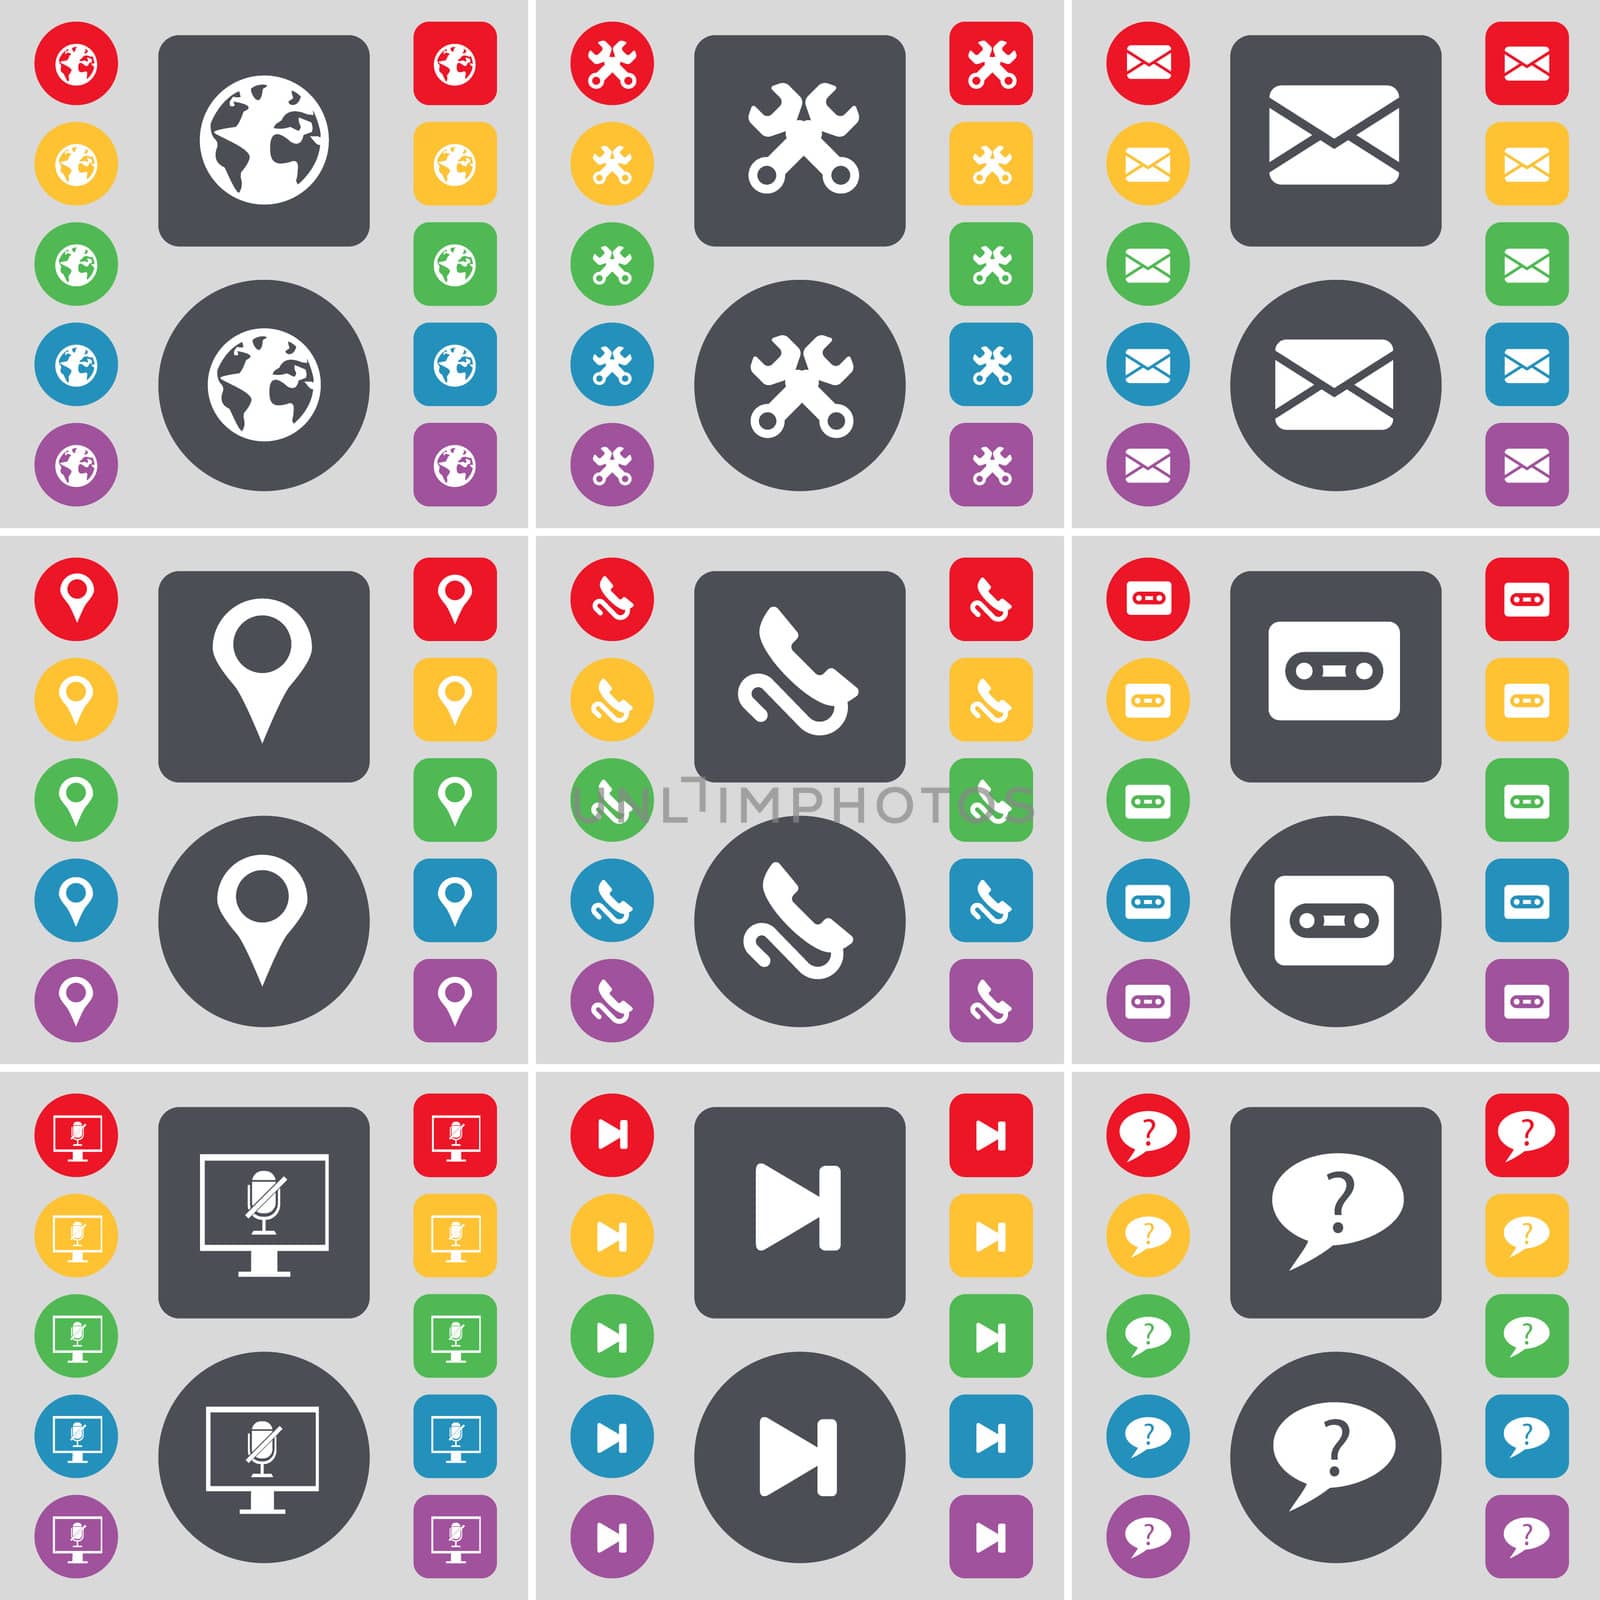 Earth, Wrenches, Message, Checkpoint, Receiver, Cassette, Monitor, Media skip, Chat cloud icon symbol. A large set of flat, colored buttons for your design. illustration